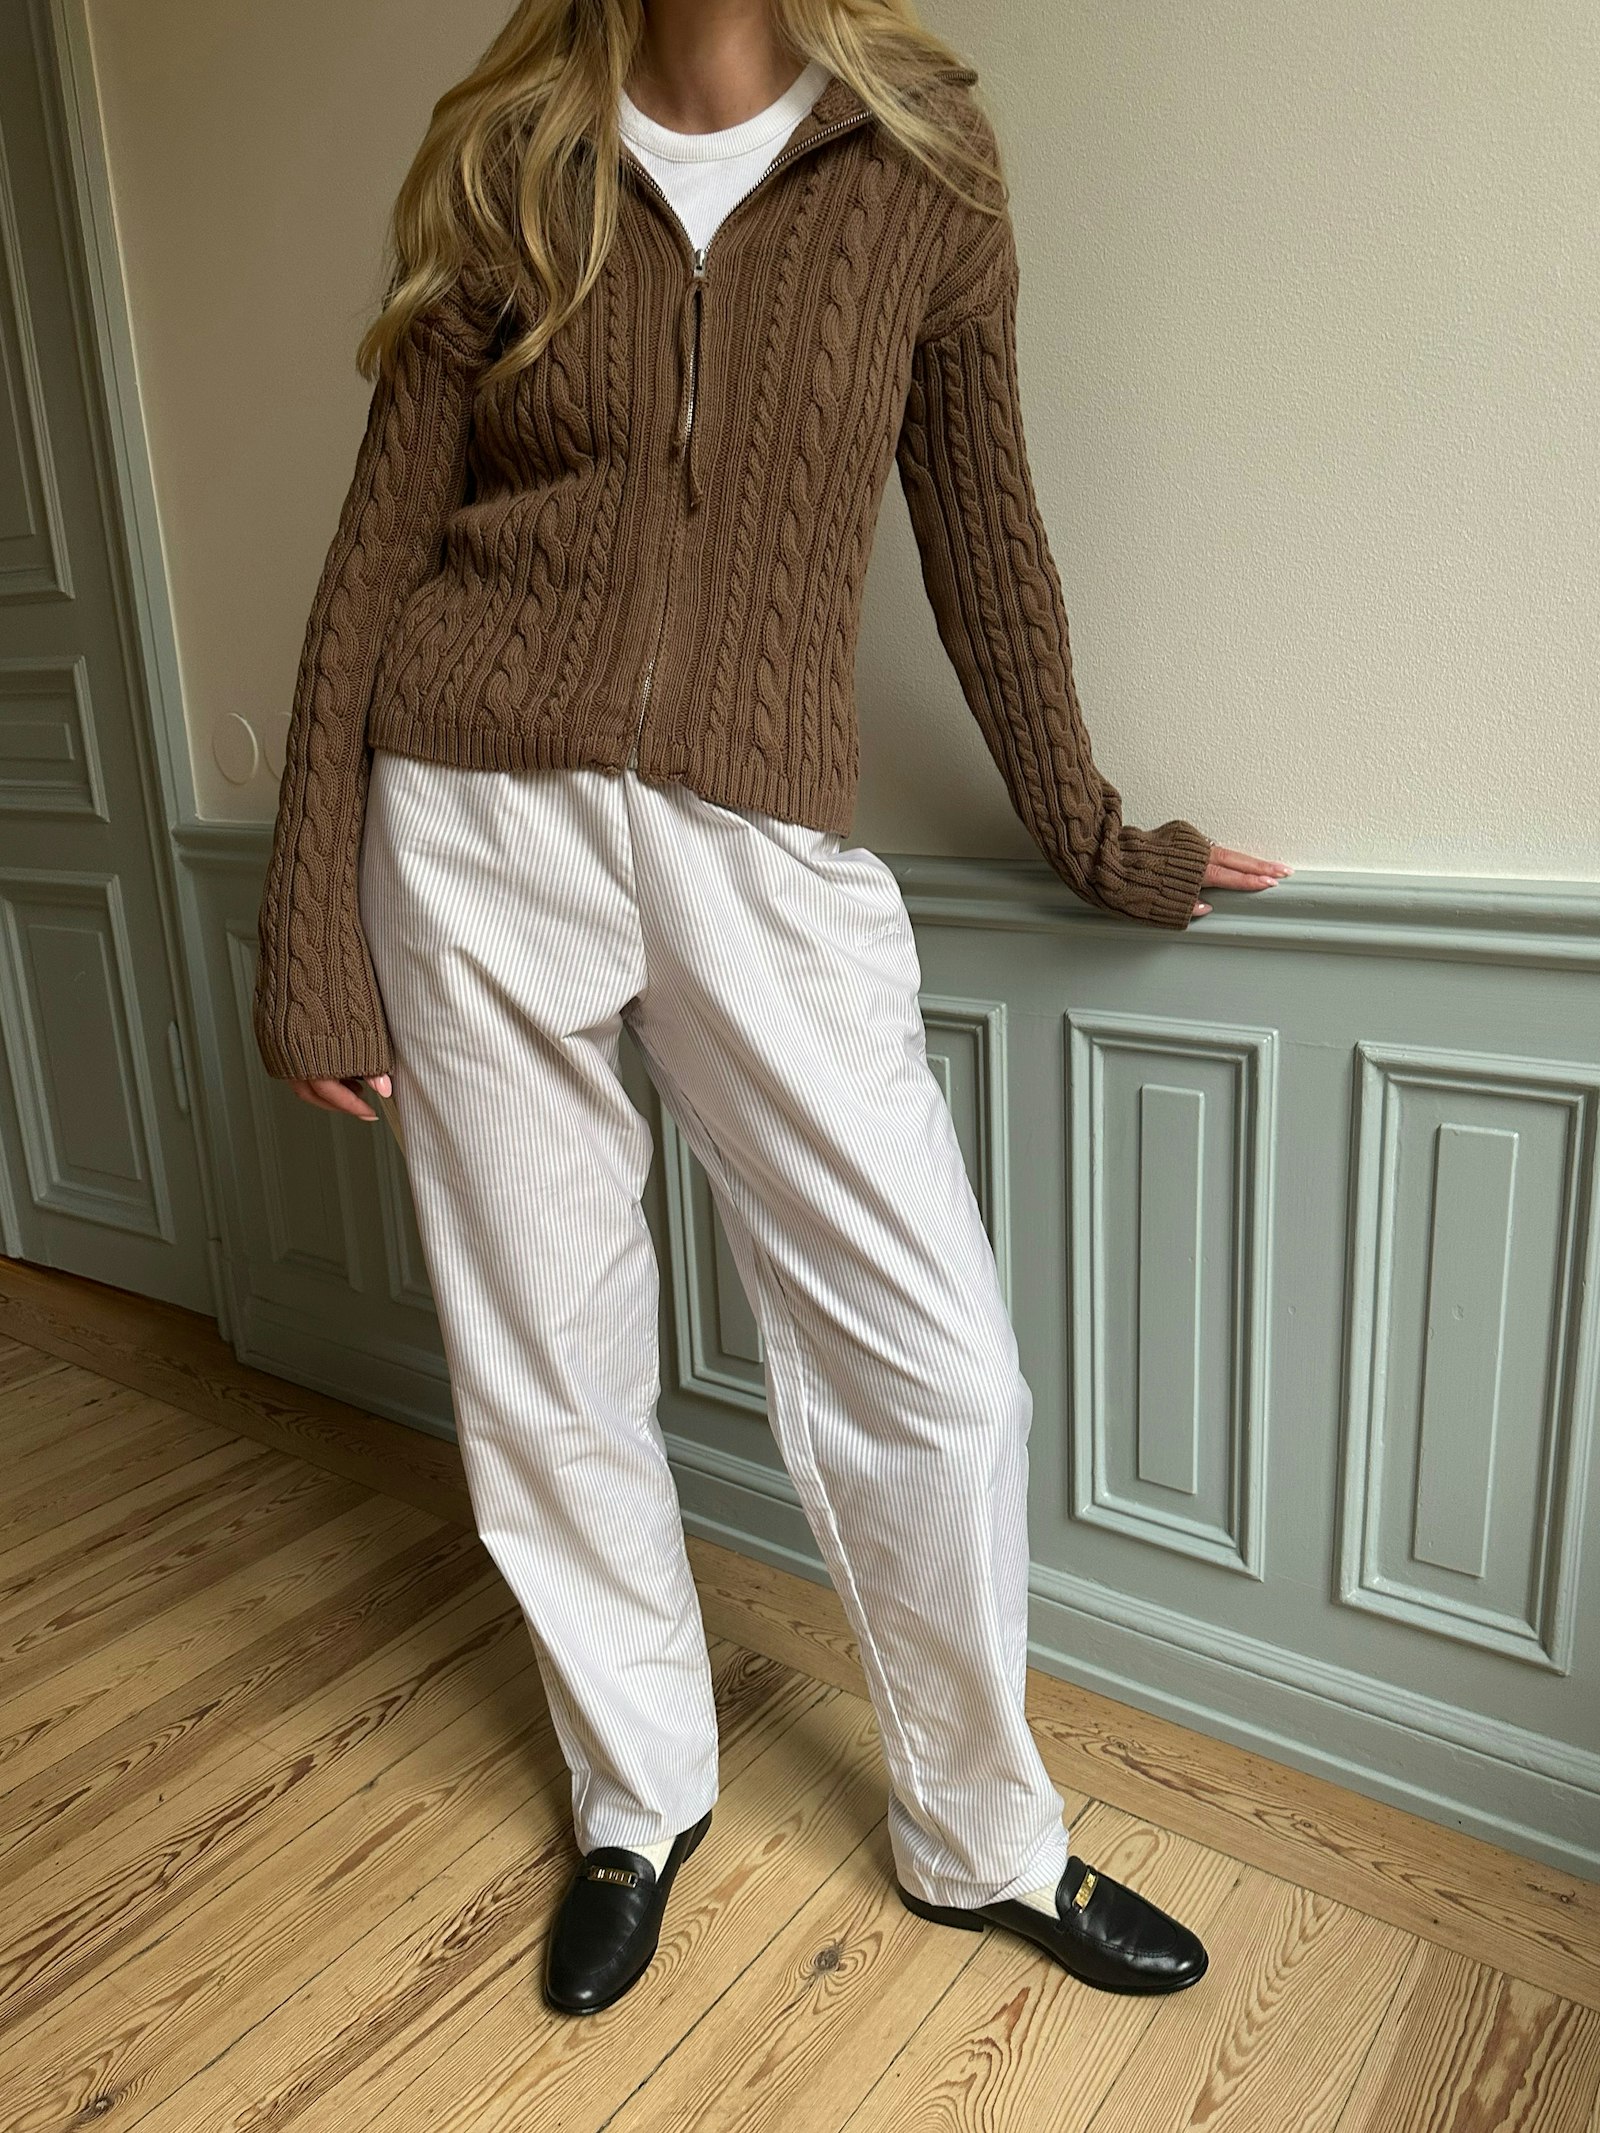 Djerf Avenue Breezy Pant Dupes, Gallery posted by Jessanotherday